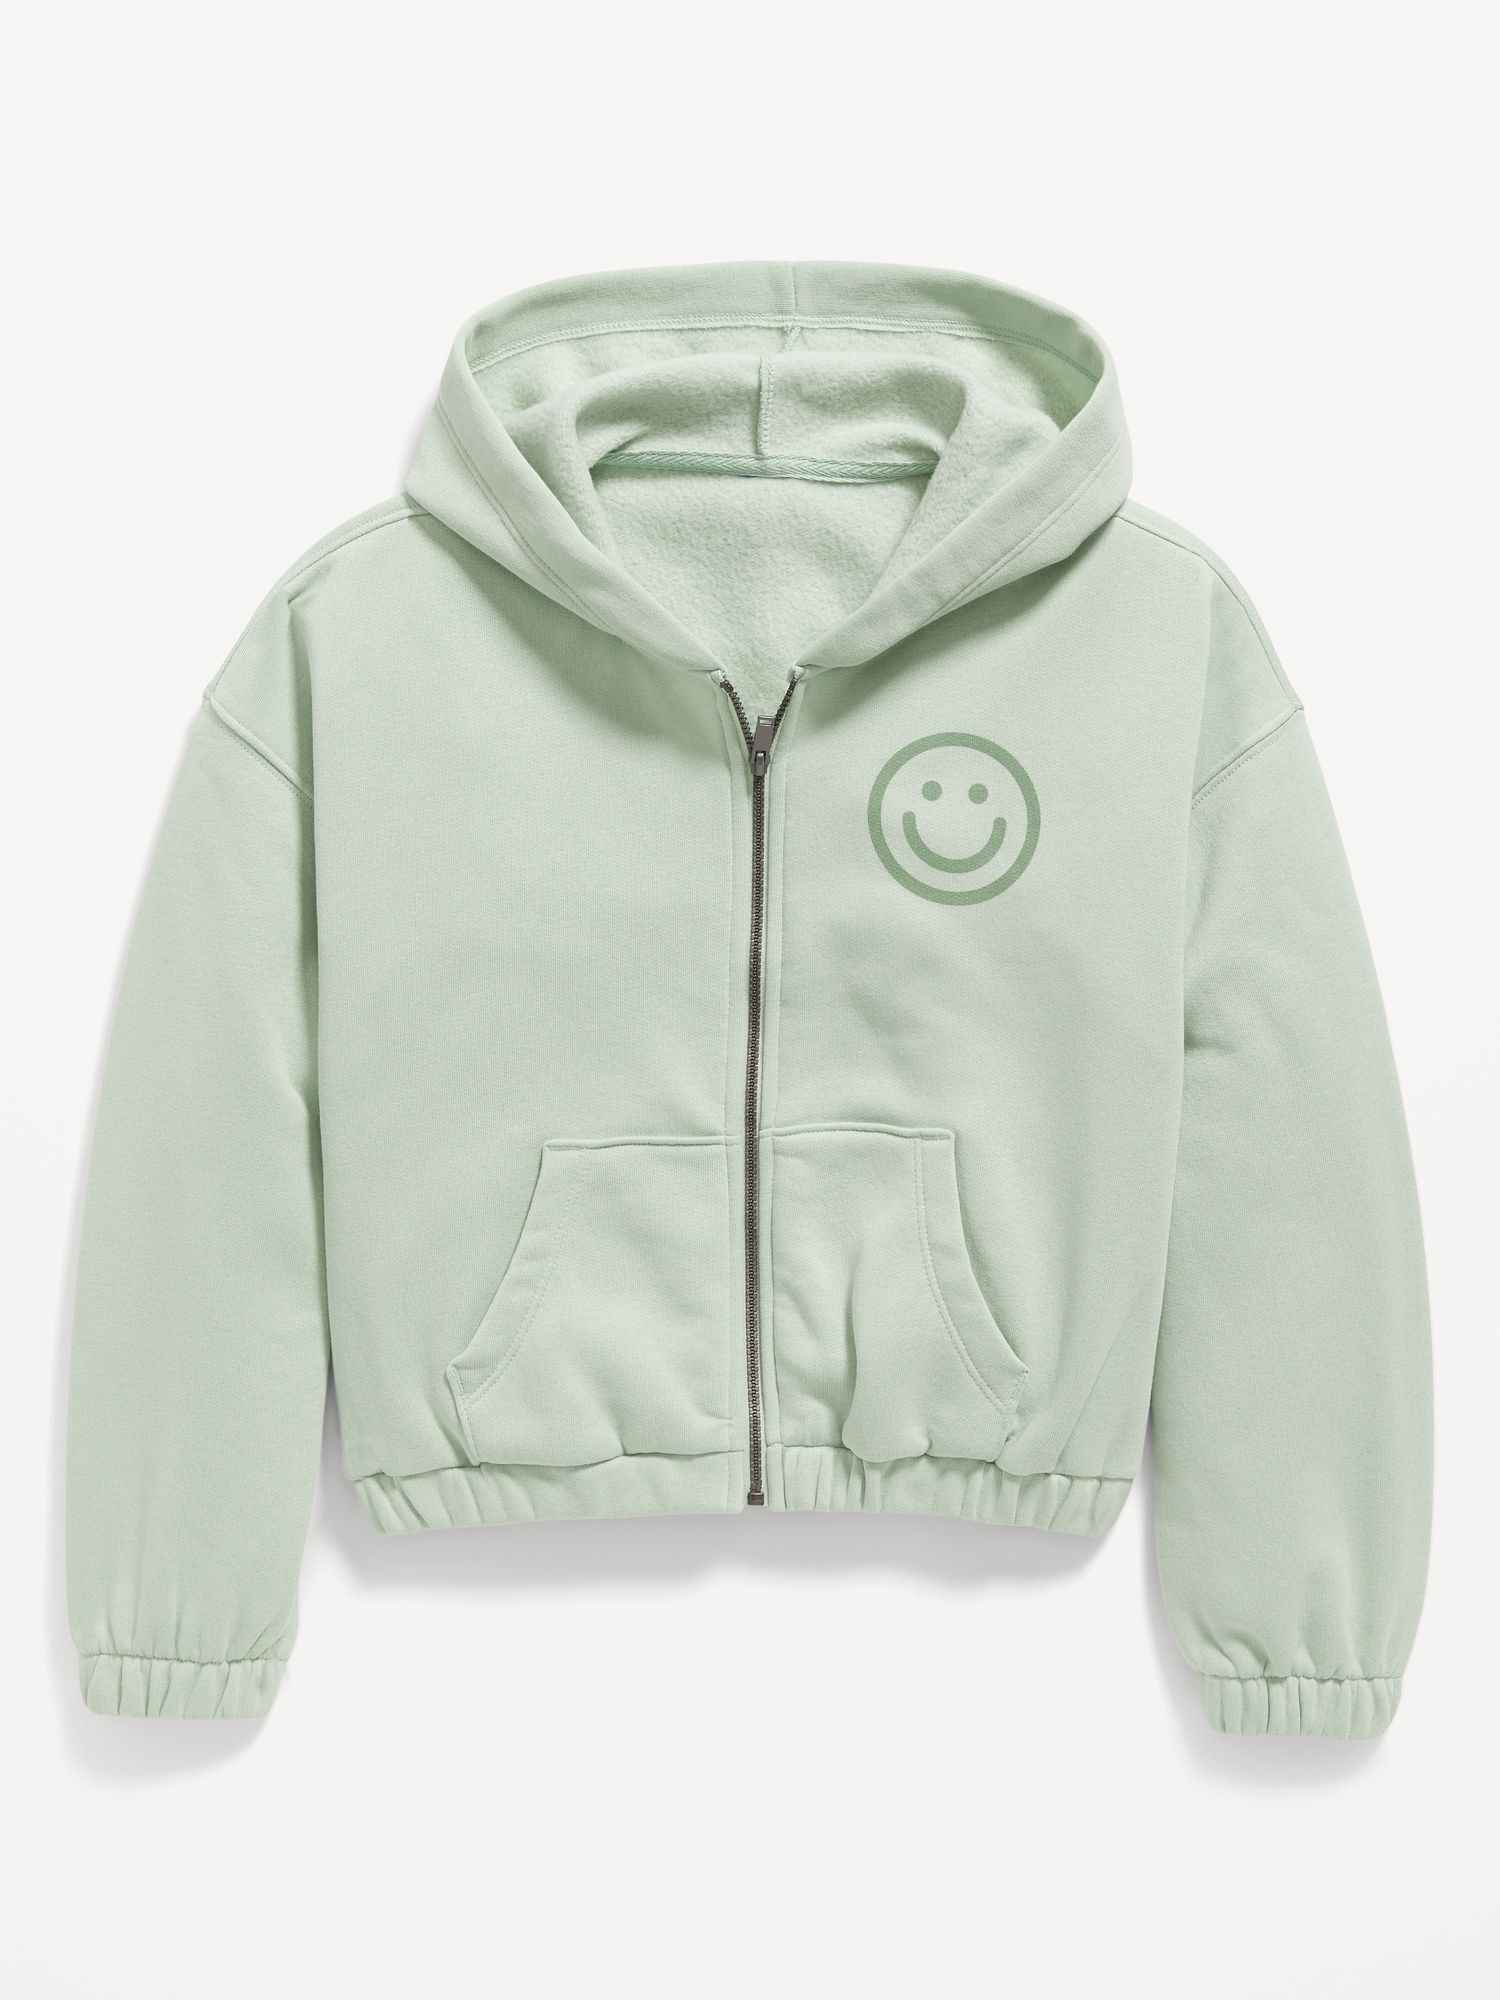 Cinched-Hem Graphic Zip Hoodie for Girls | Old Navy